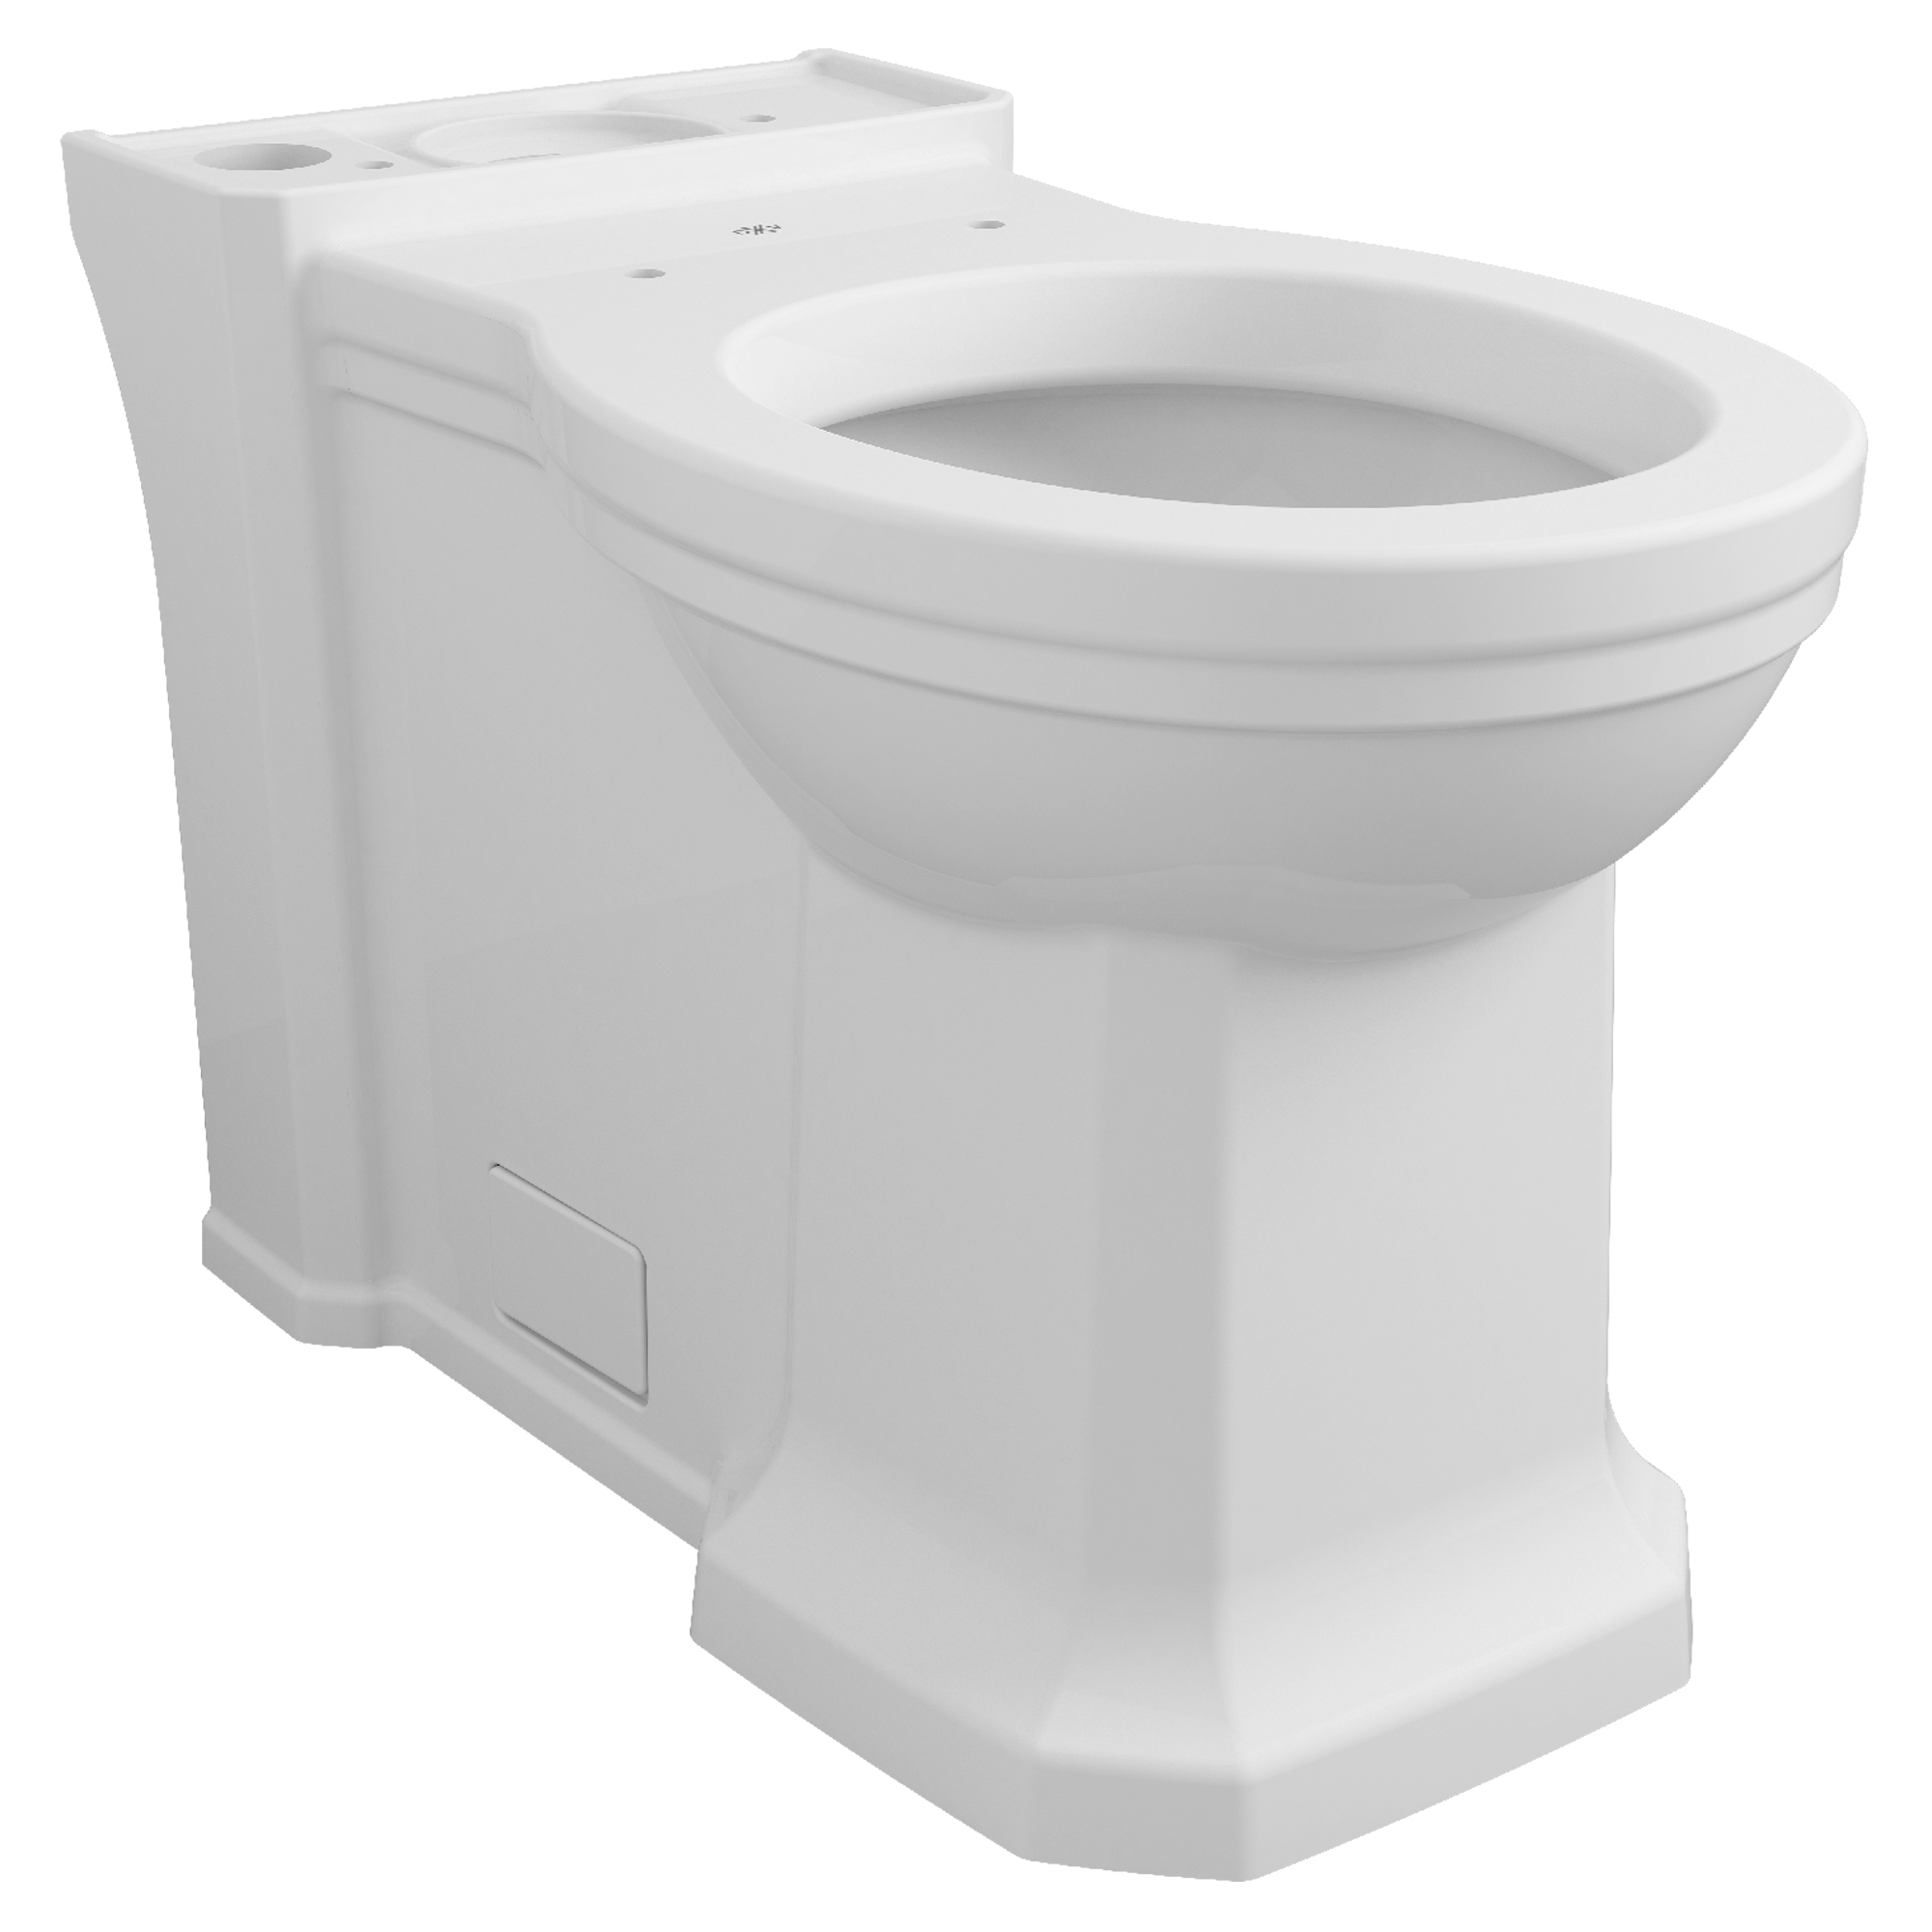 Fitzgerald® Chair-Height Round-Front Toilet Bowl with Seat